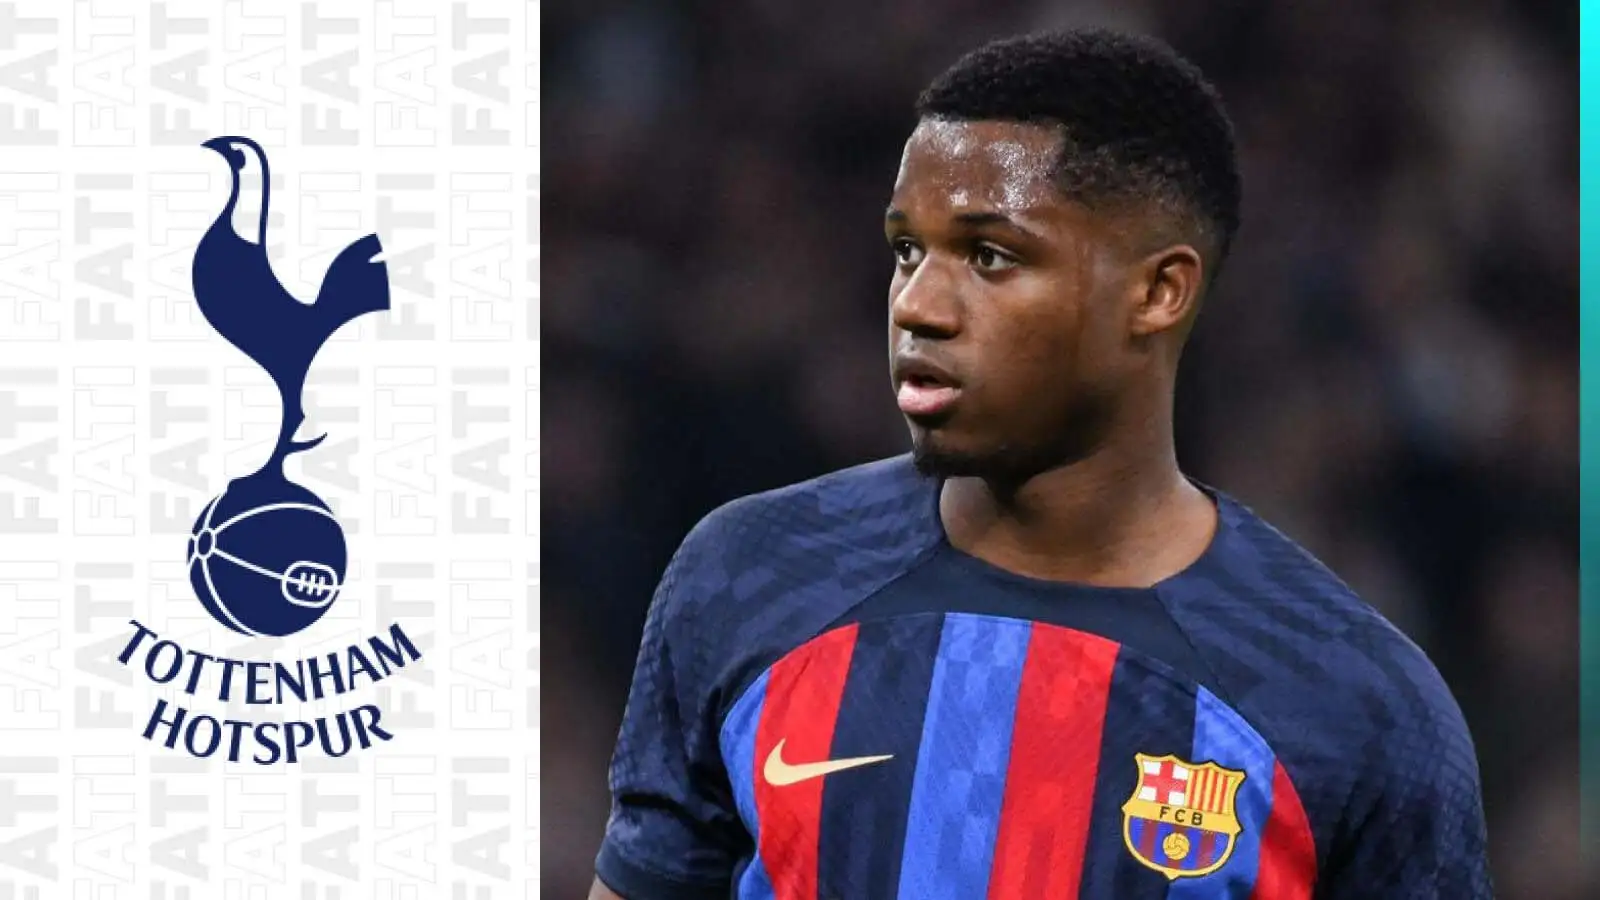 Tottenham are looking to sign Barcelona winger Ansu Fati